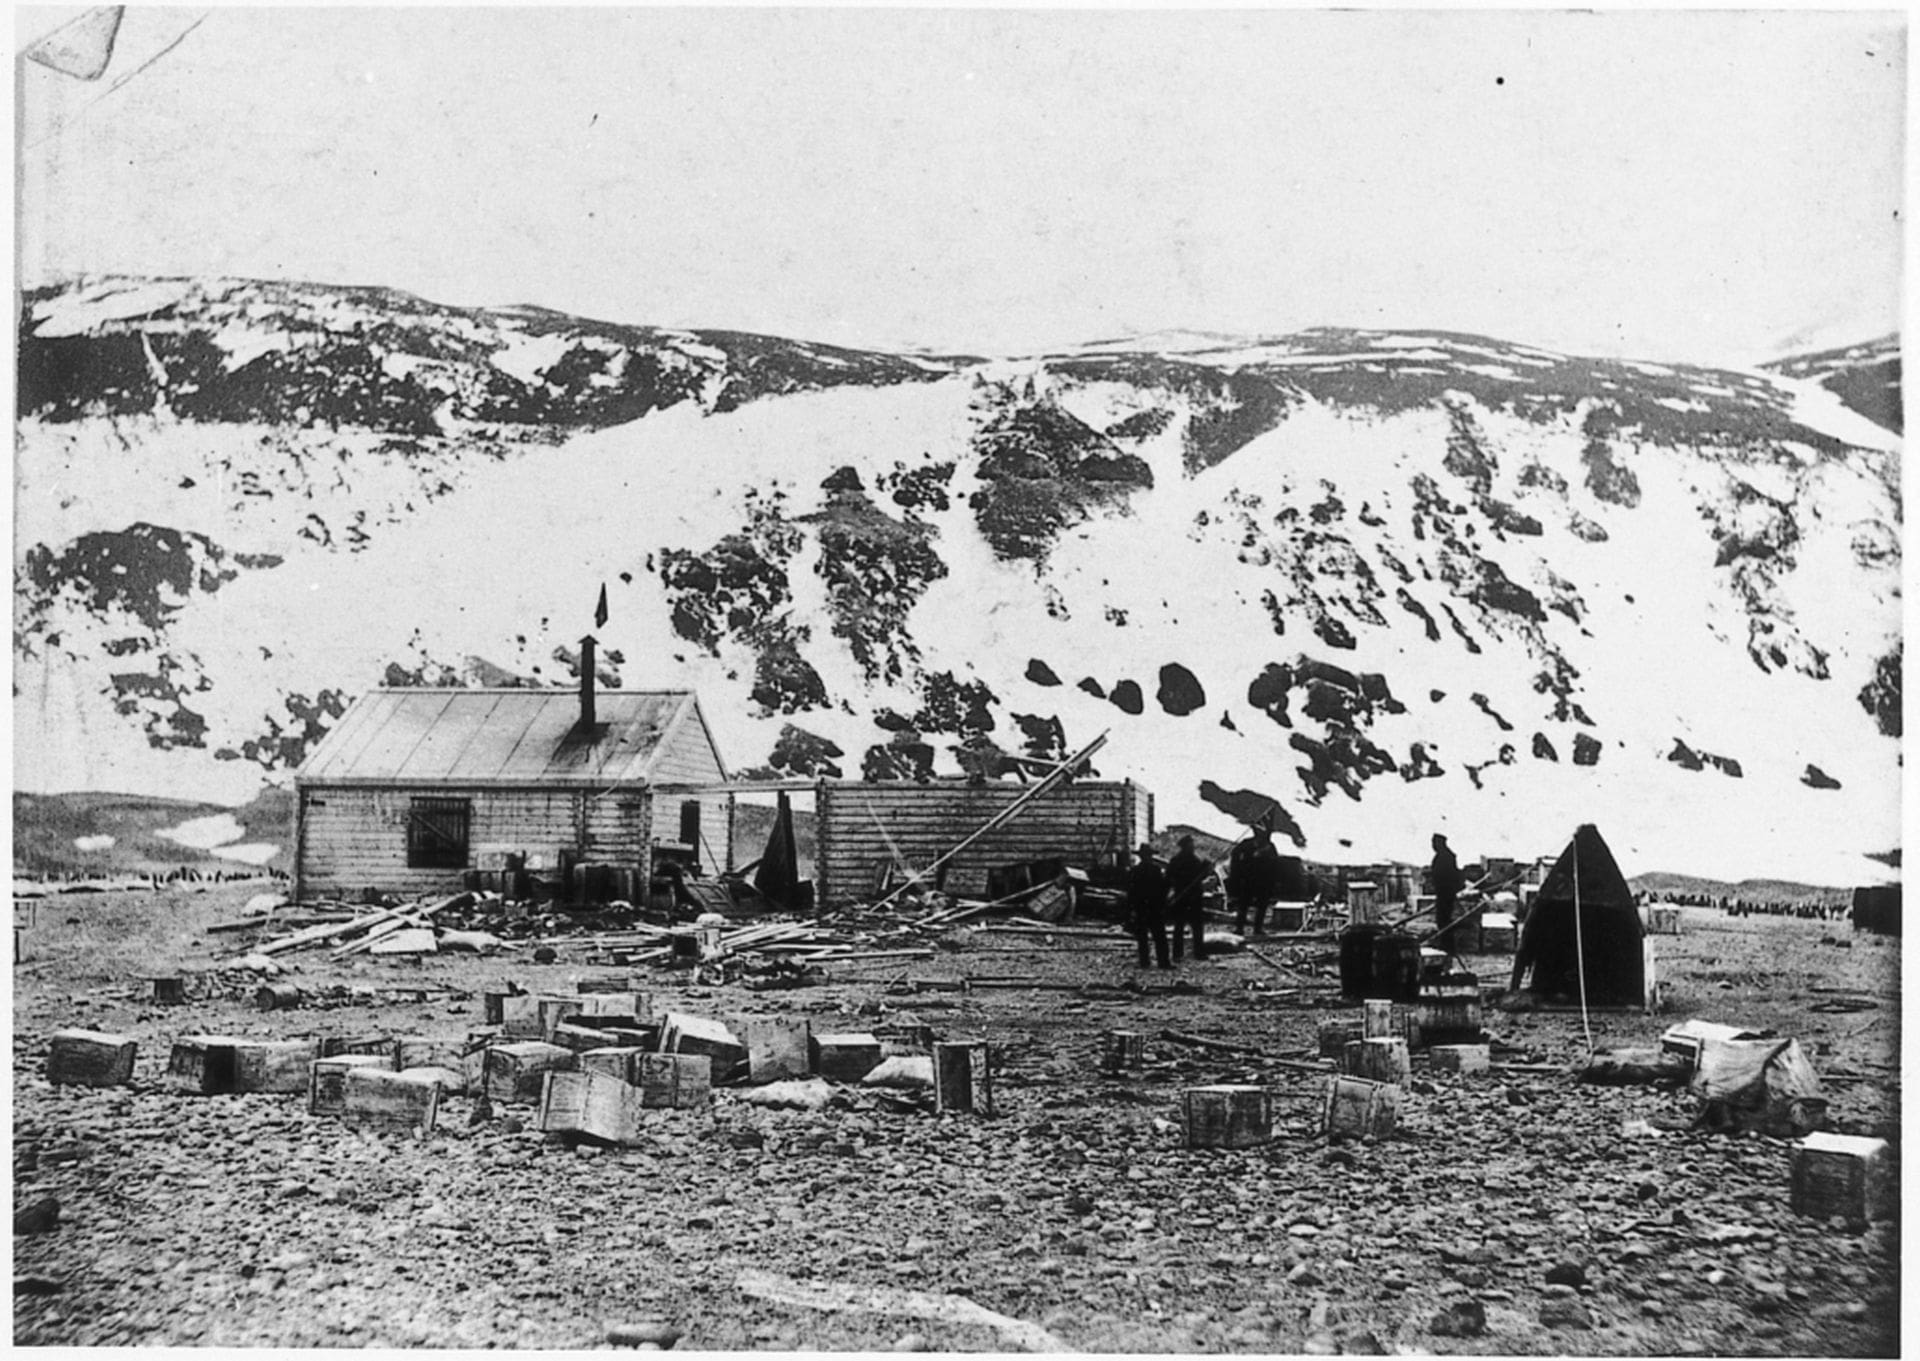 The huts as photographed on the arrival of the Scott's Discovery expedition at Cape Adare in 1902.